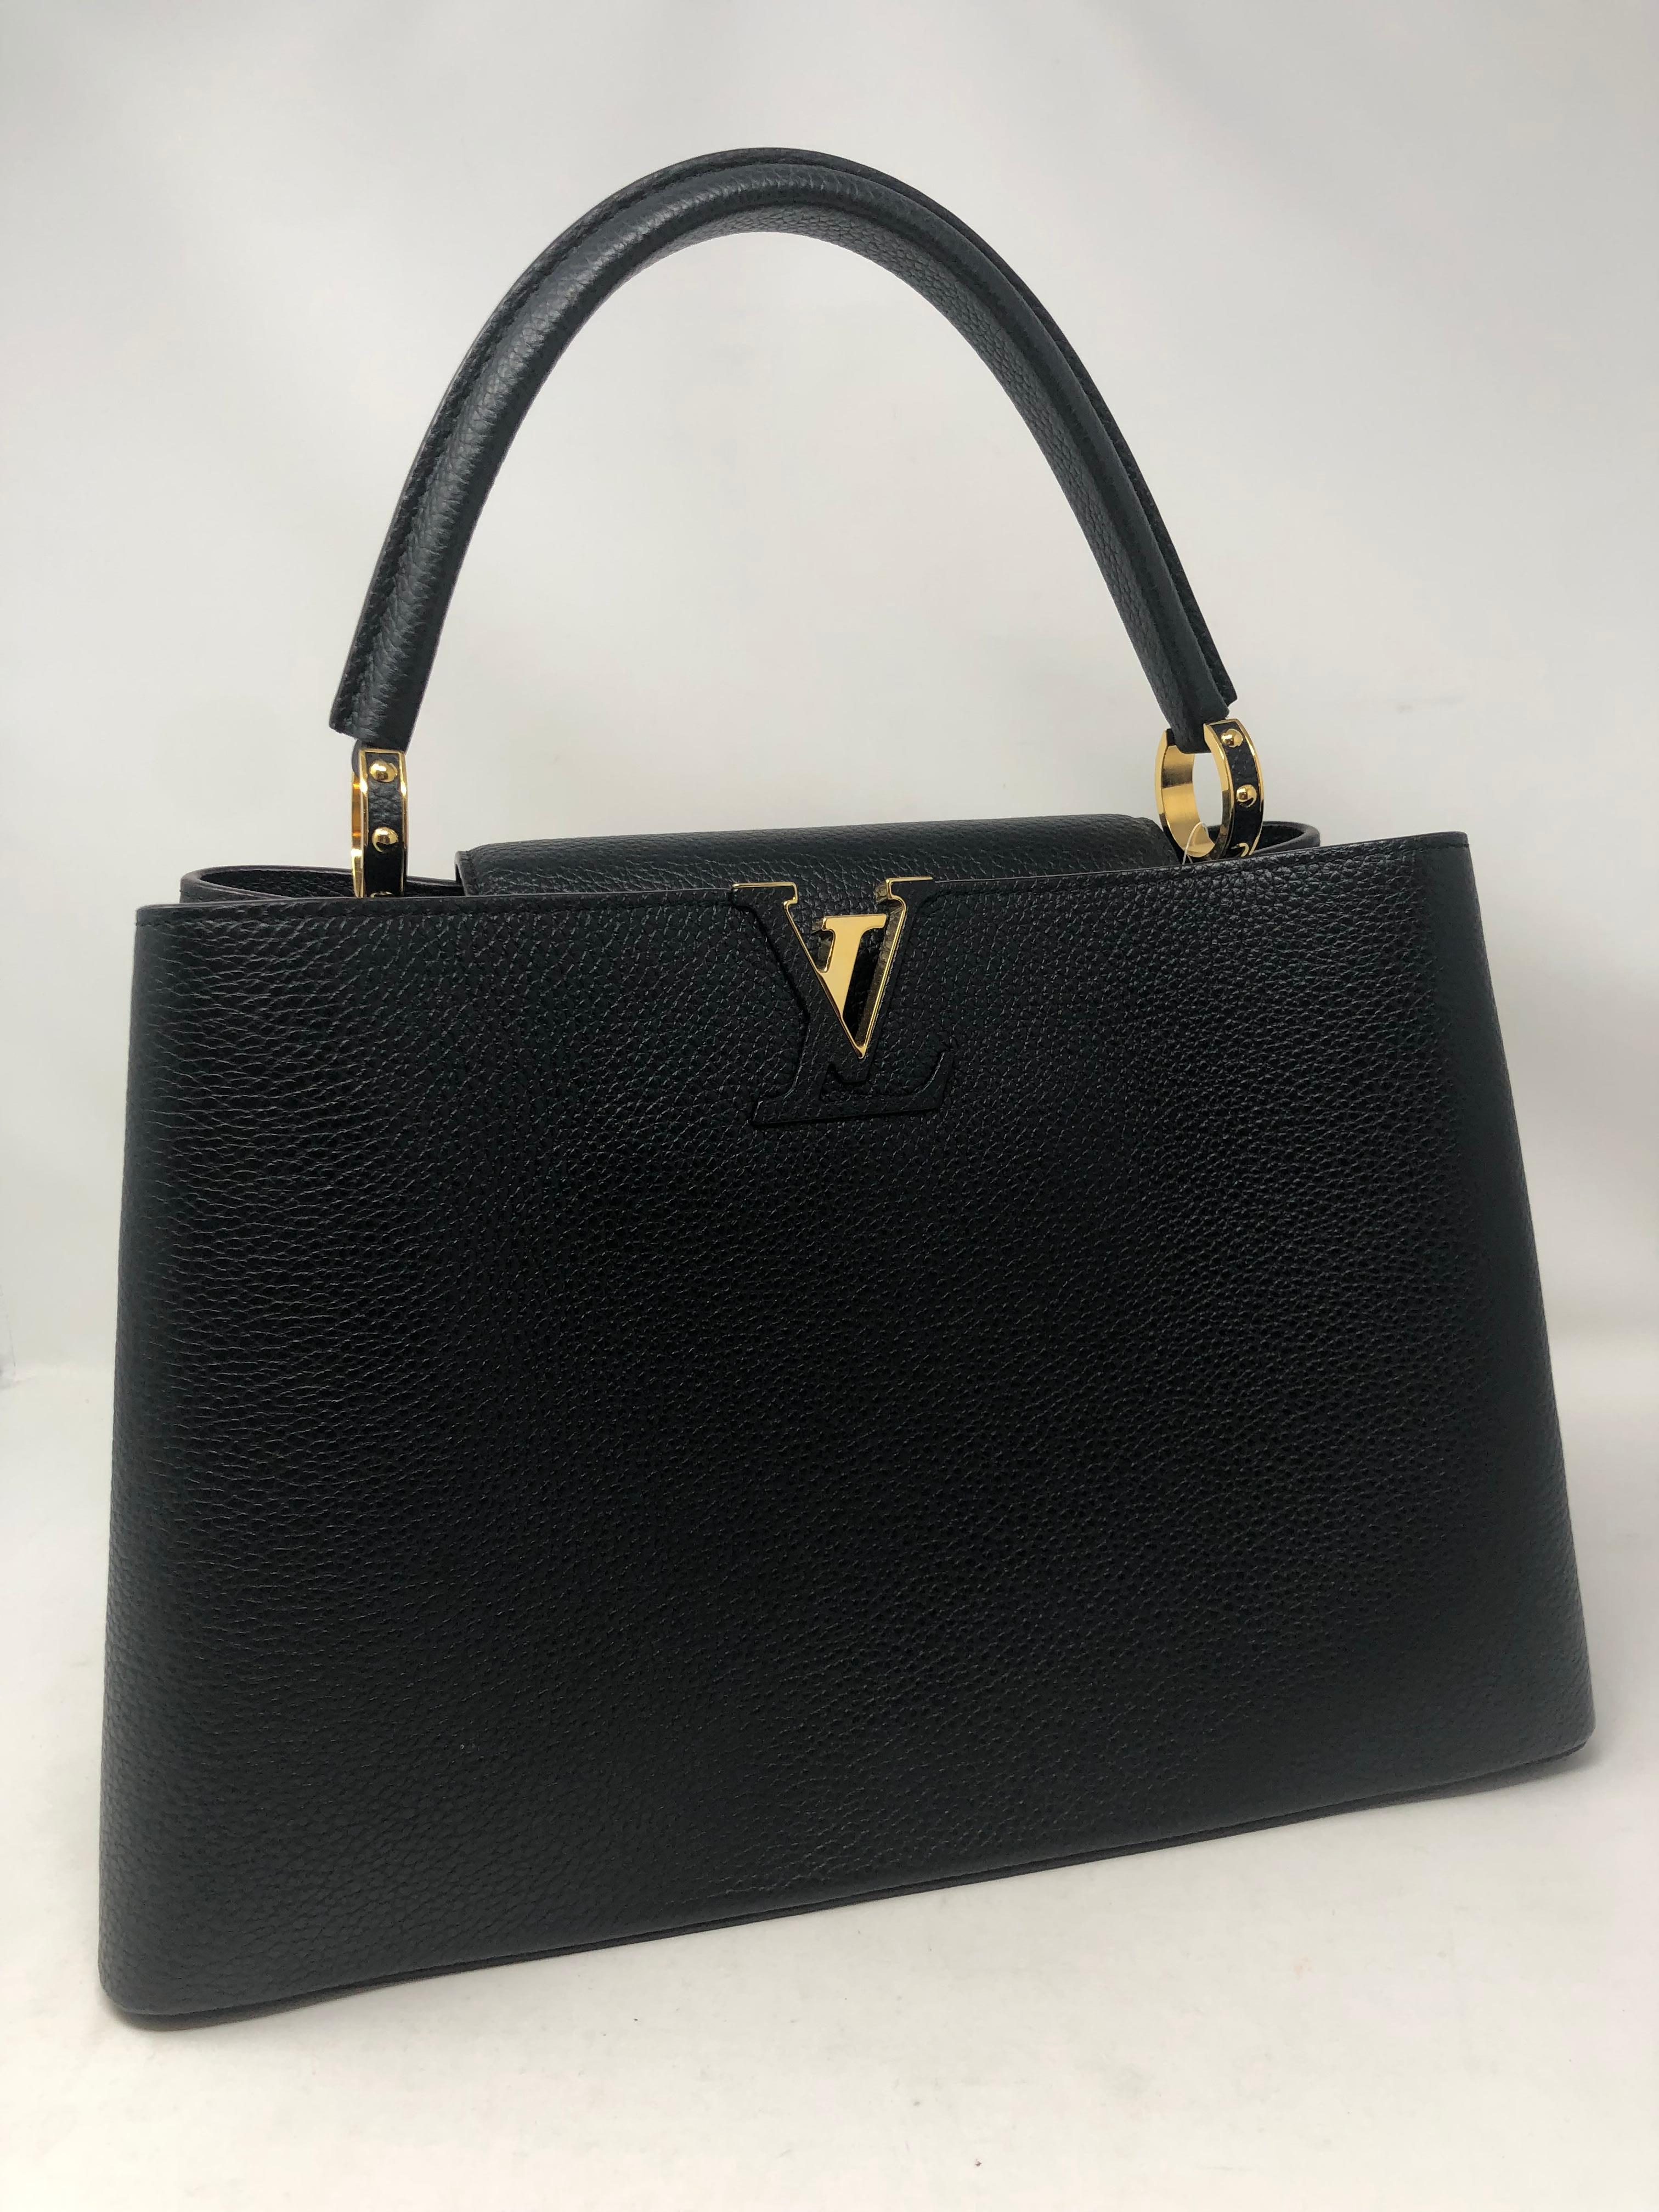 Louis Vuitton Black Capucines MM Bag. Black taurillon leather is like brand new condition. Beautiful raspberry leather lining is clean too. LV Logo accent on front face and can be covered with additional top closure. The fleur LV flower logo is on